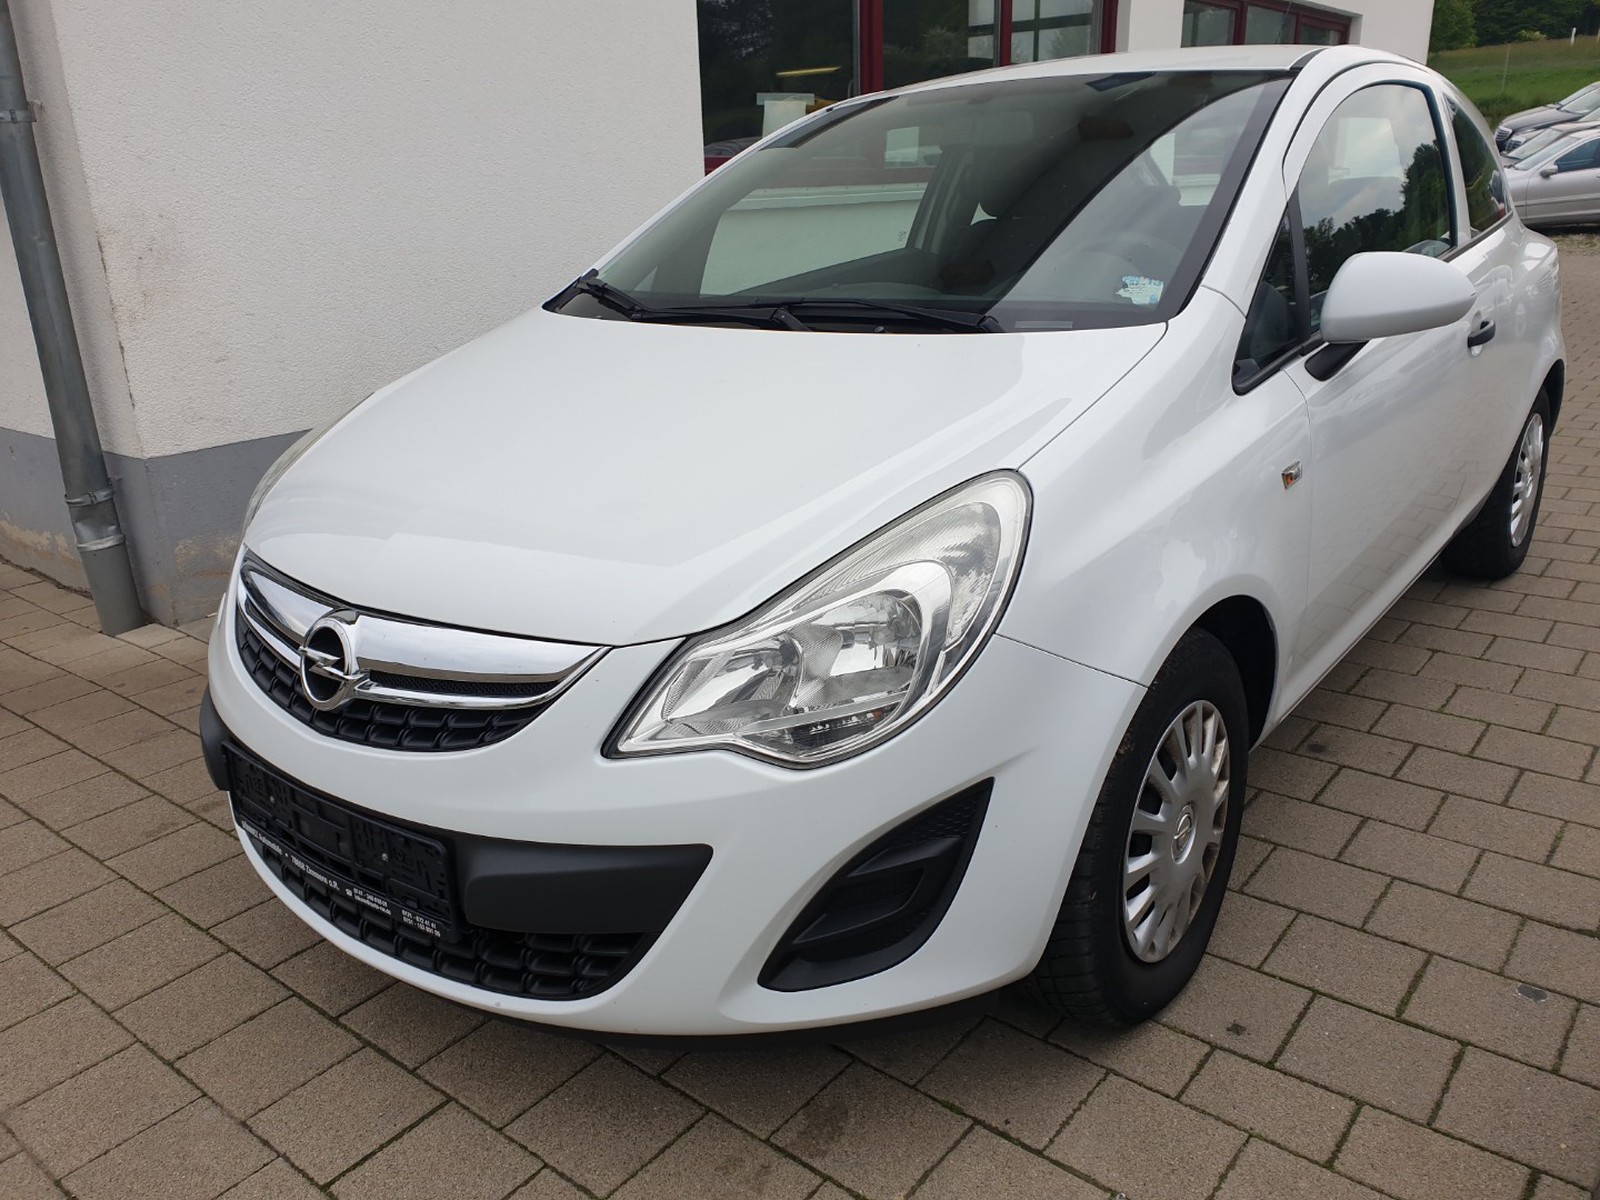 Opel Corsa D Selection used buy in Zimmern ob Rottweil - Int.Nr.: 1133 SOLD